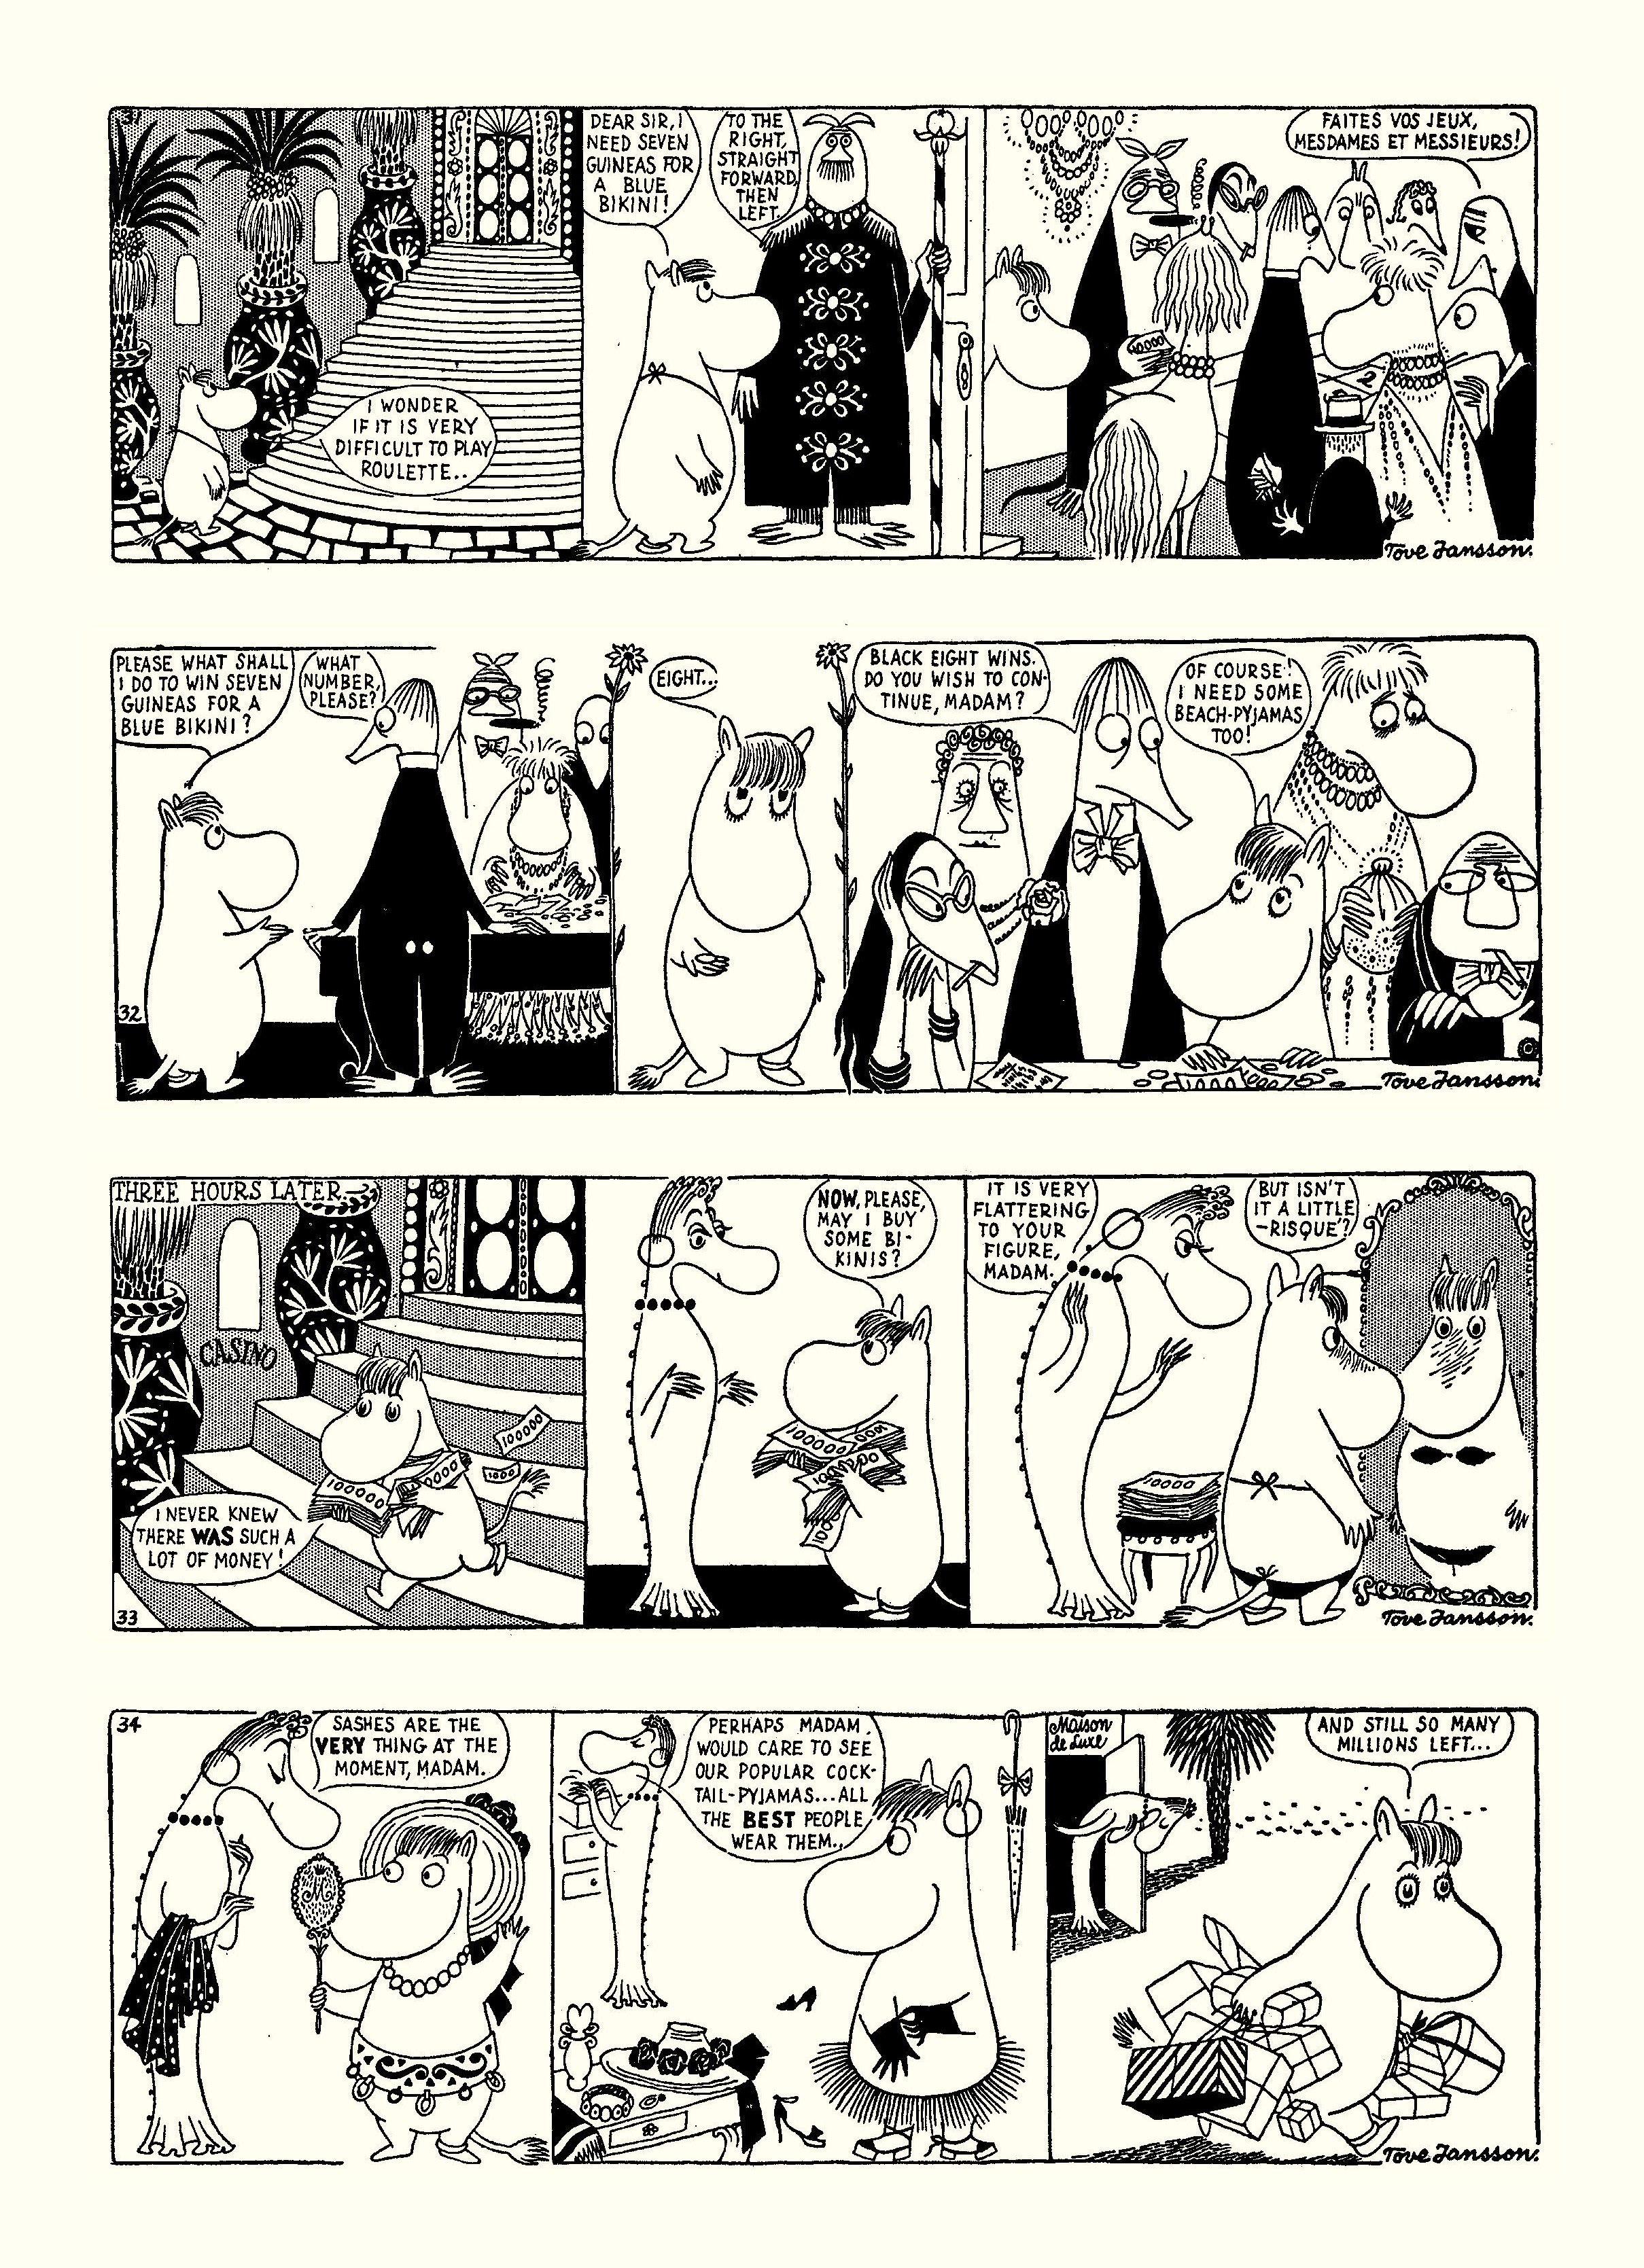 Read online Moomin: The Complete Tove Jansson Comic Strip comic -  Issue # TPB 1 - 56